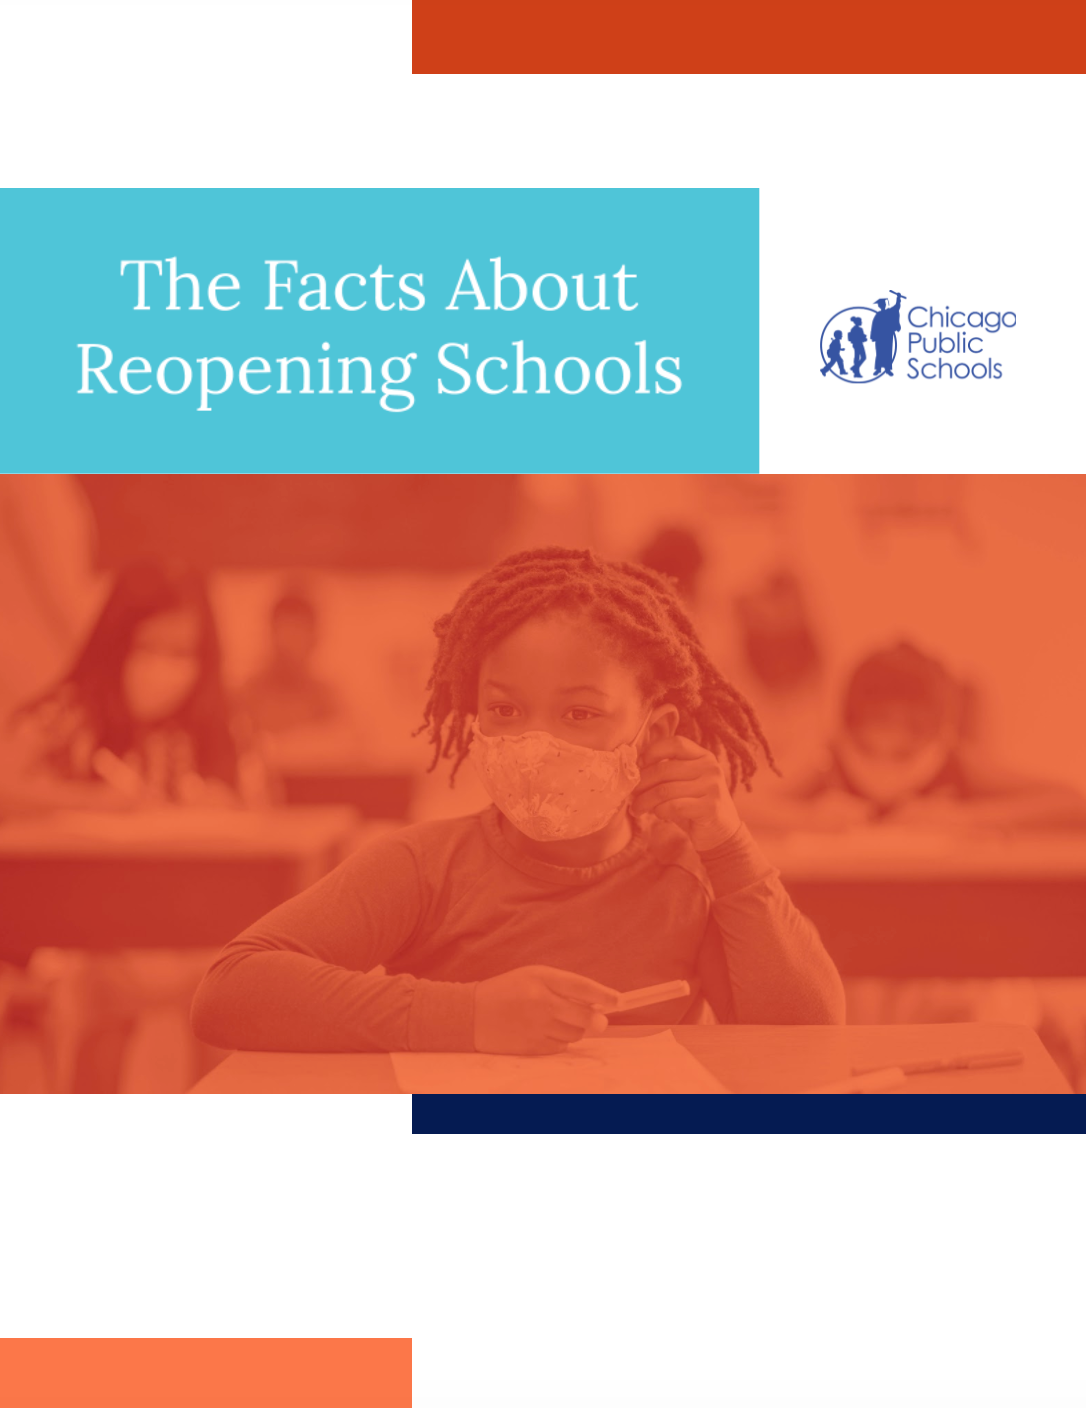 The Facts About Reopening Schools